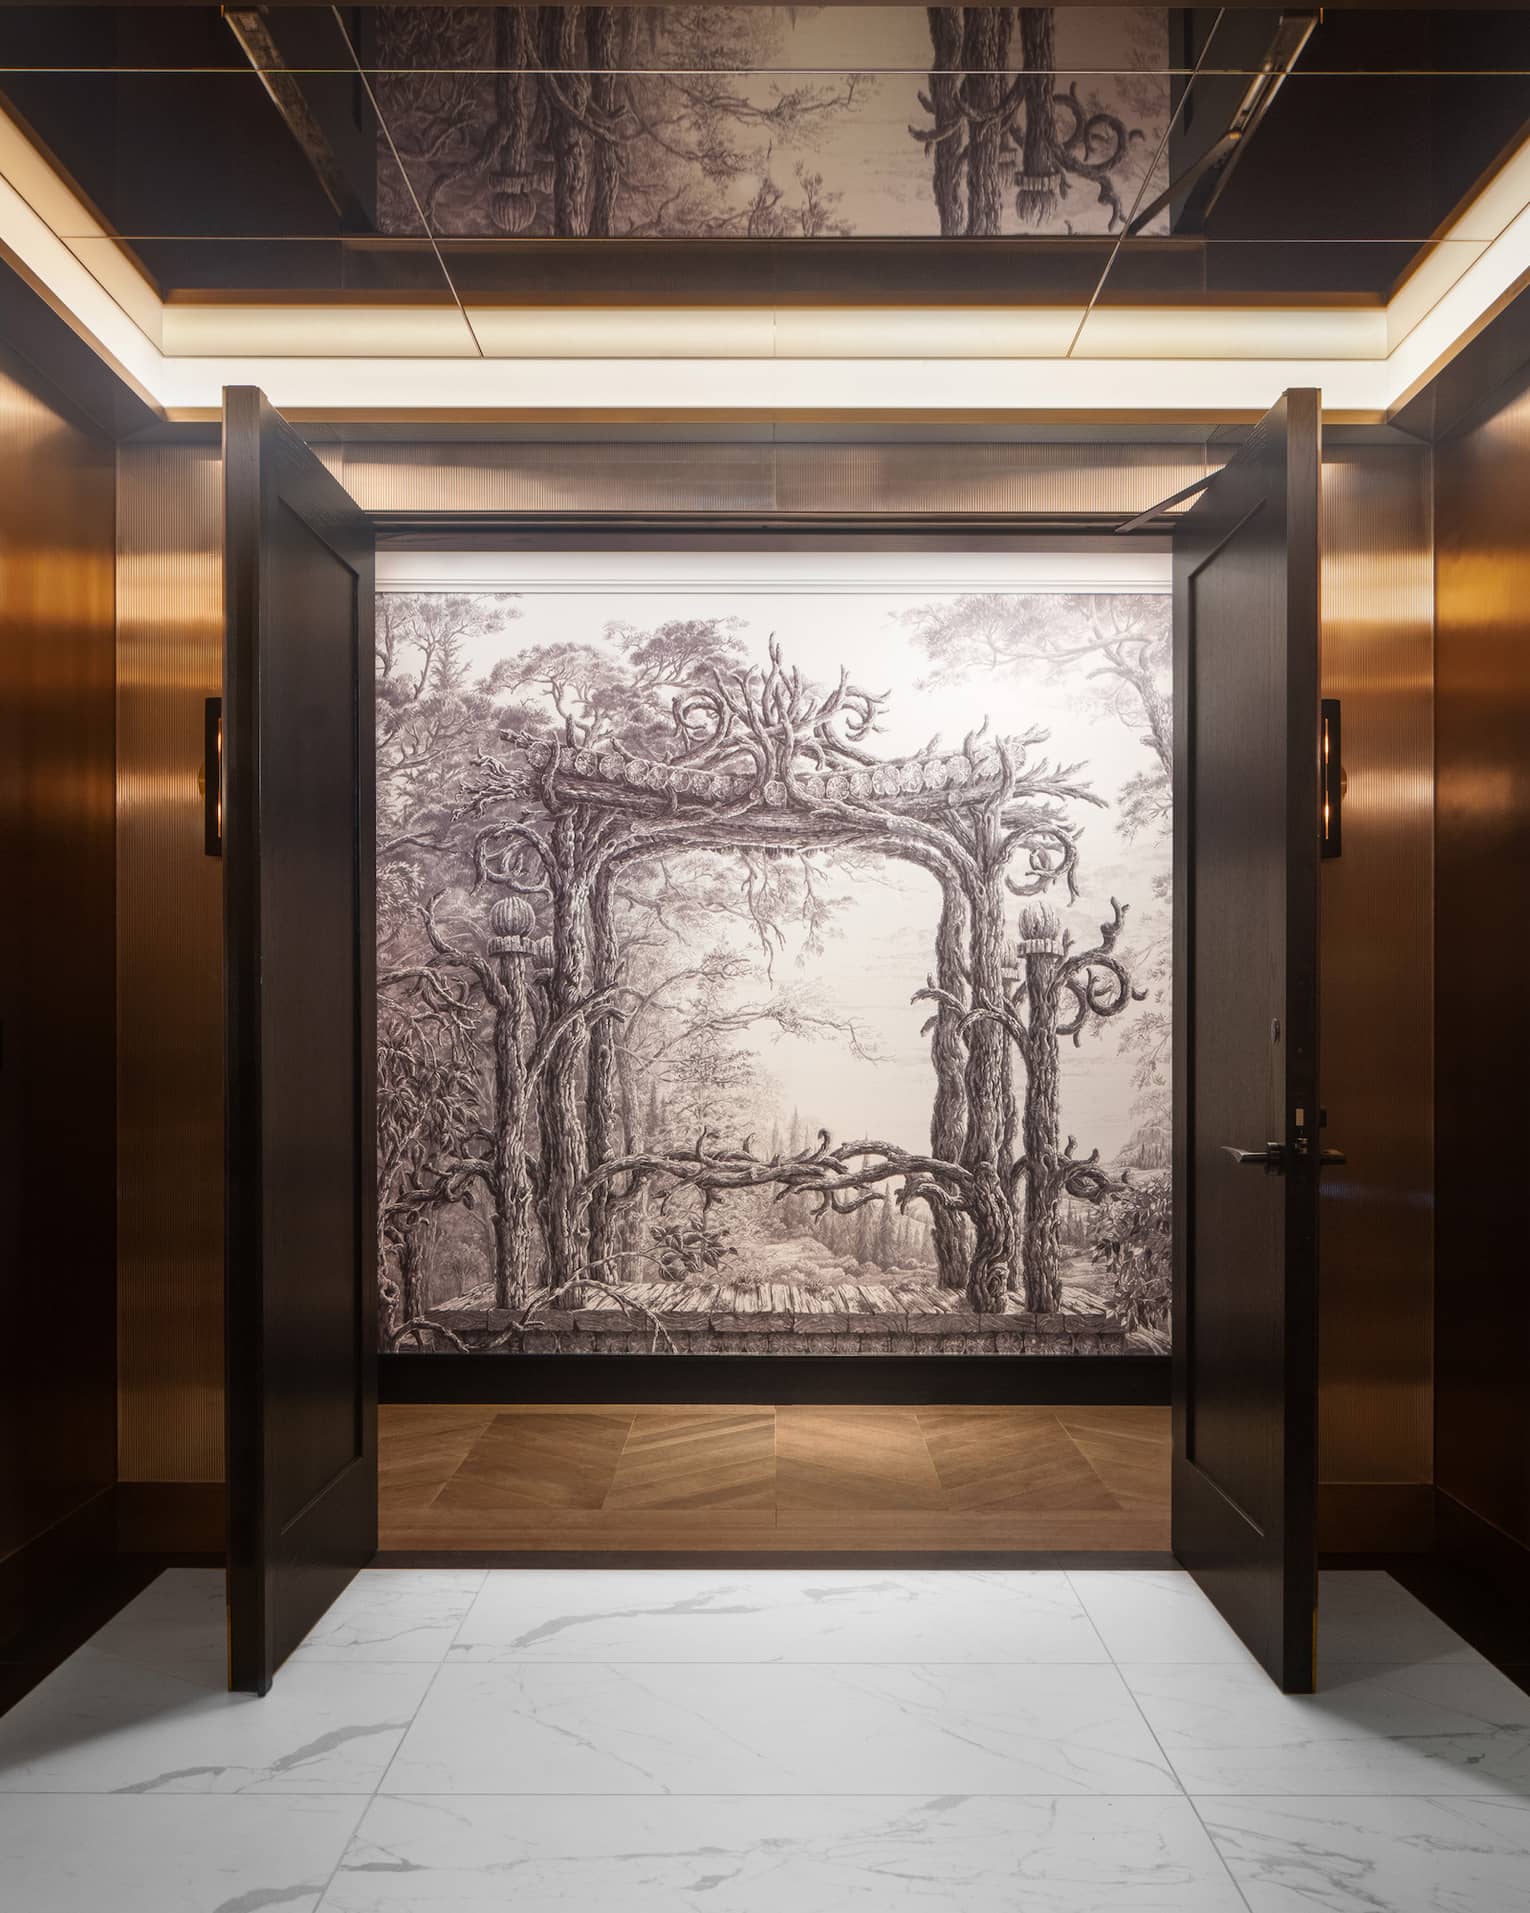 Interior wood-panelled hallway with two doors opening up to reveal a black-and-white painting